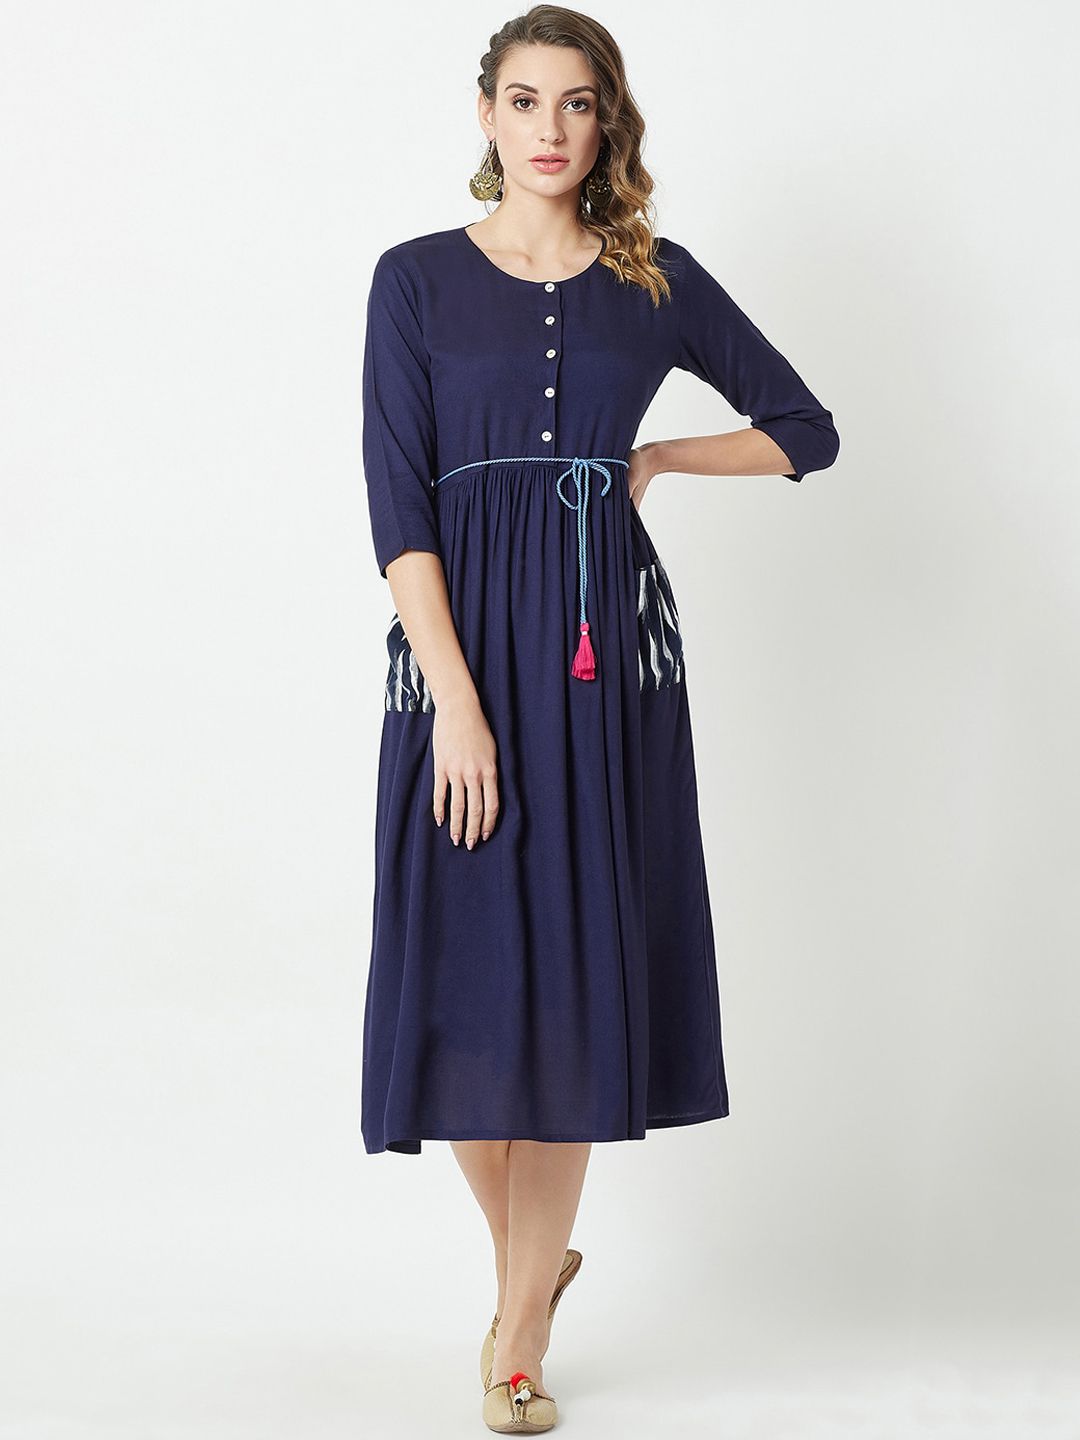 Women miss chase dresses - Buy Women miss chase dresses online in India